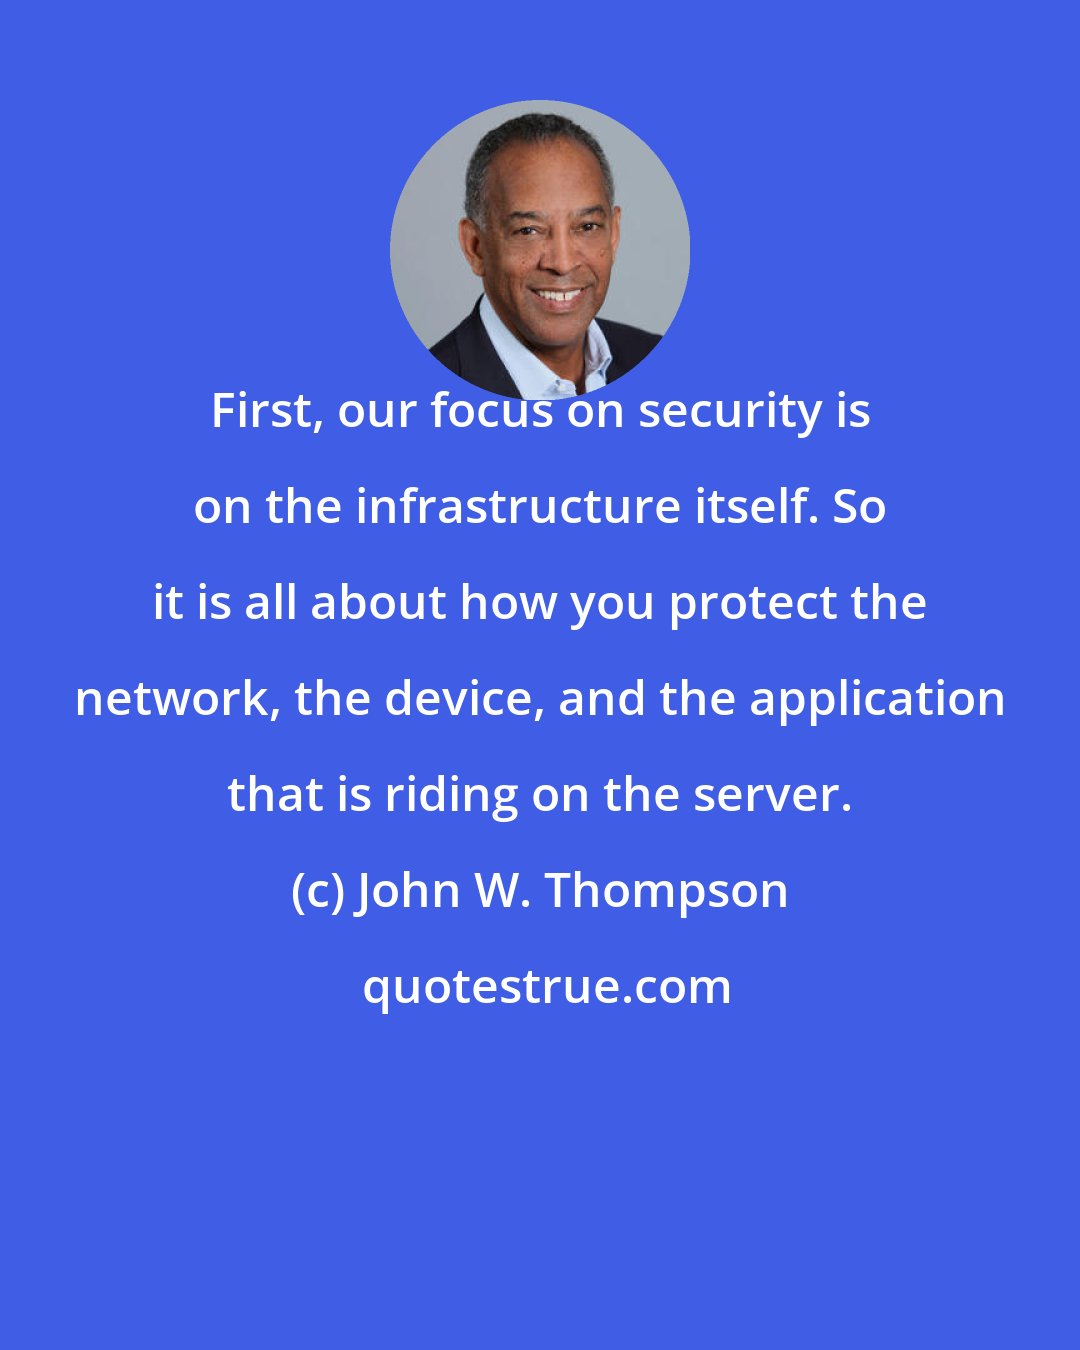 John W. Thompson: First, our focus on security is on the infrastructure itself. So it is all about how you protect the network, the device, and the application that is riding on the server.